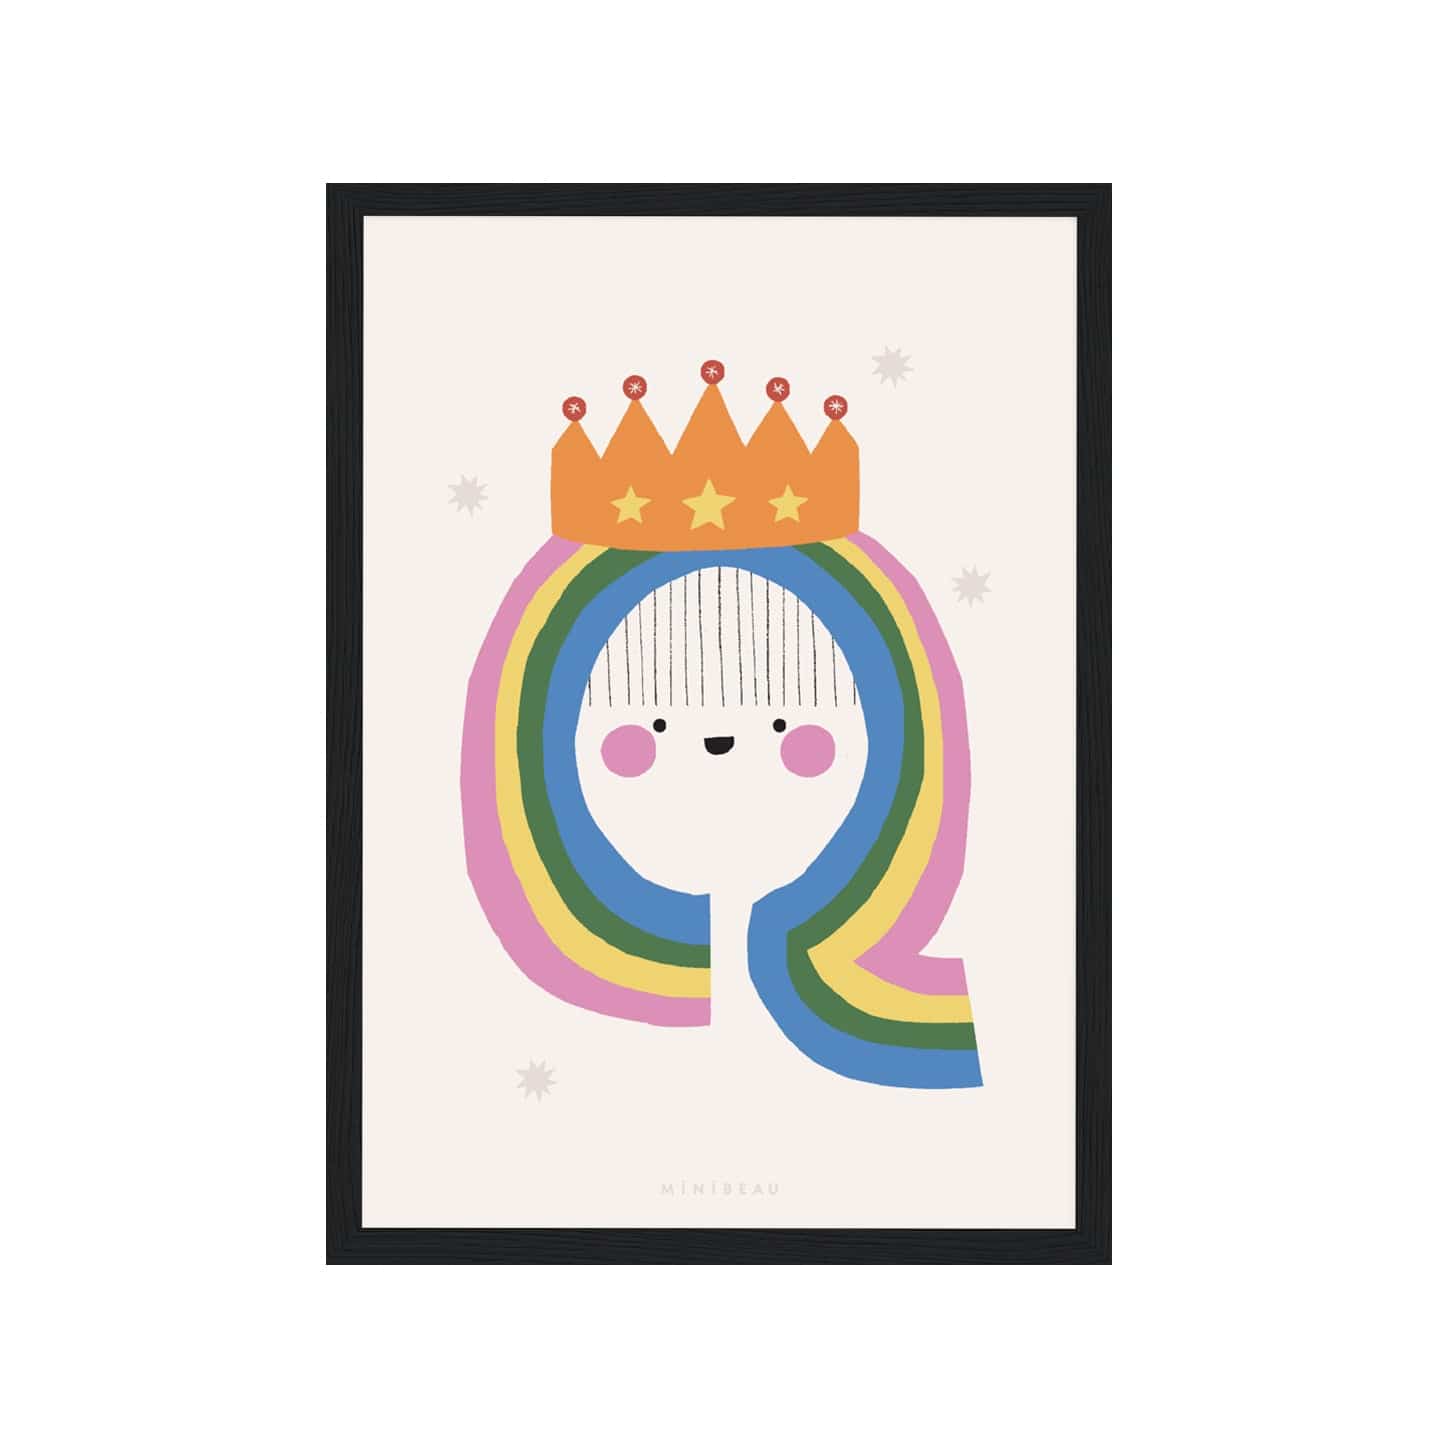 Art print in a black frame. Our Happy Alphabet 'Q' Art Print shows a smiling queen with rainbow hair and a thin fringe, wearing a gold crown with three yellow stars on the front. All on a white background.